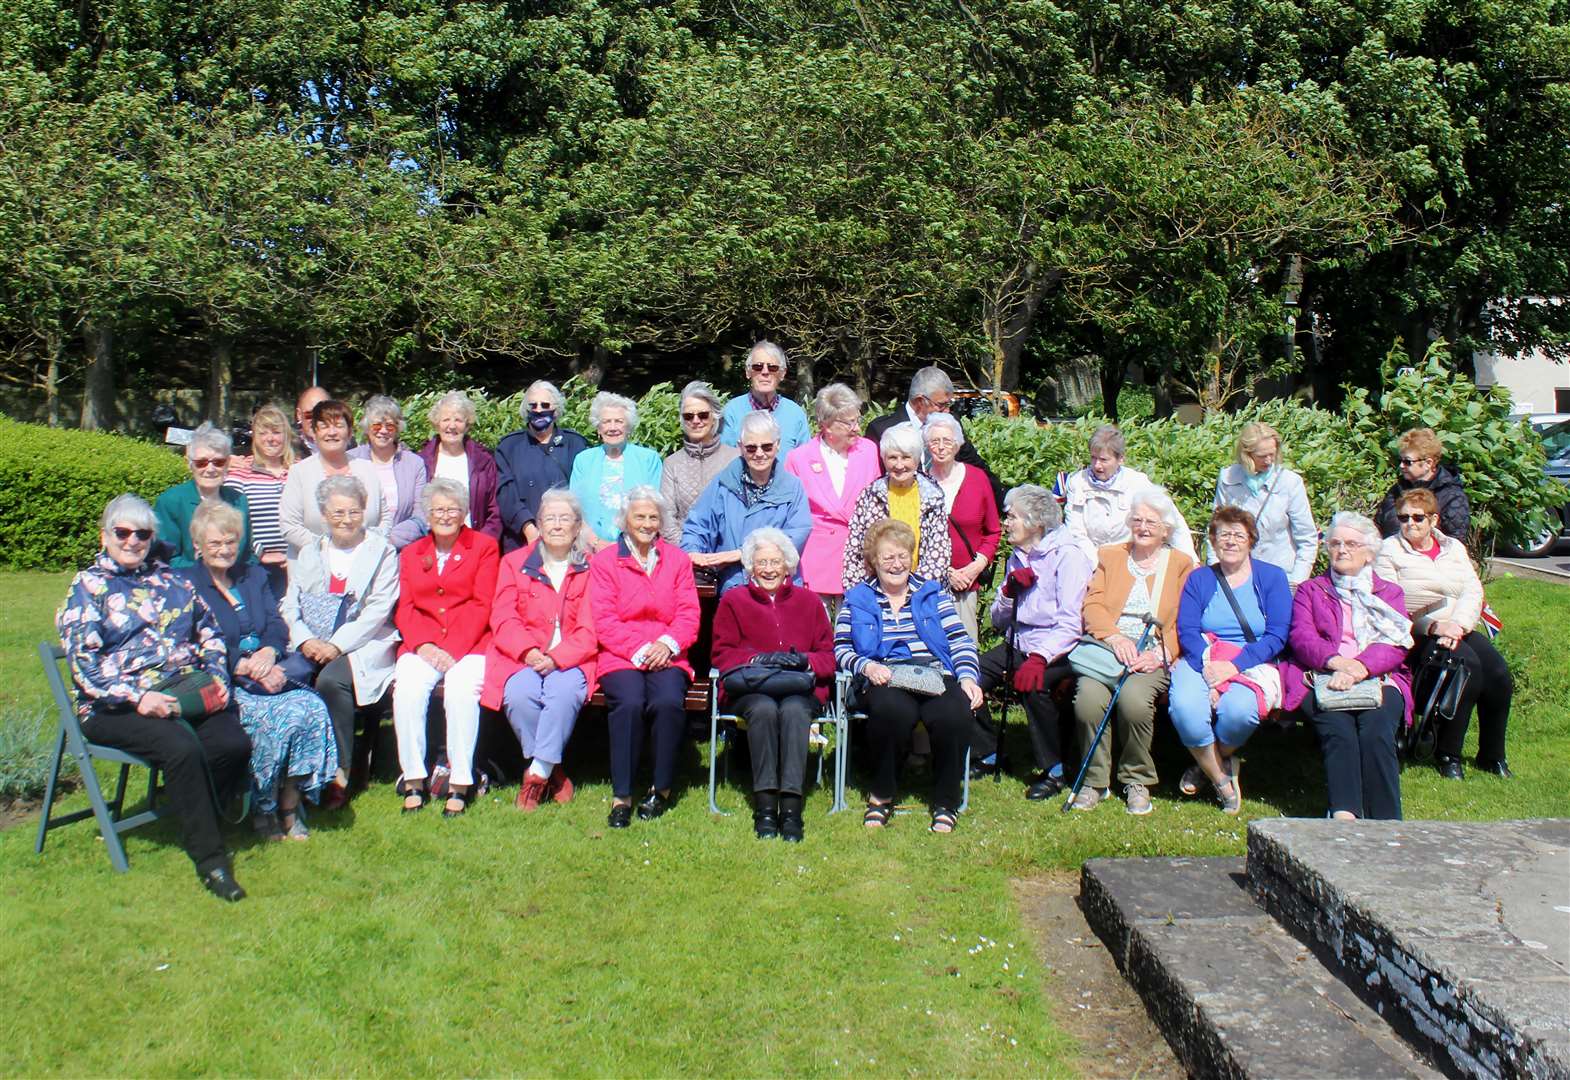 Wick and District Gardening Club marked the Queen's Platinum Jubilee by planting two trees at the riverside in June.